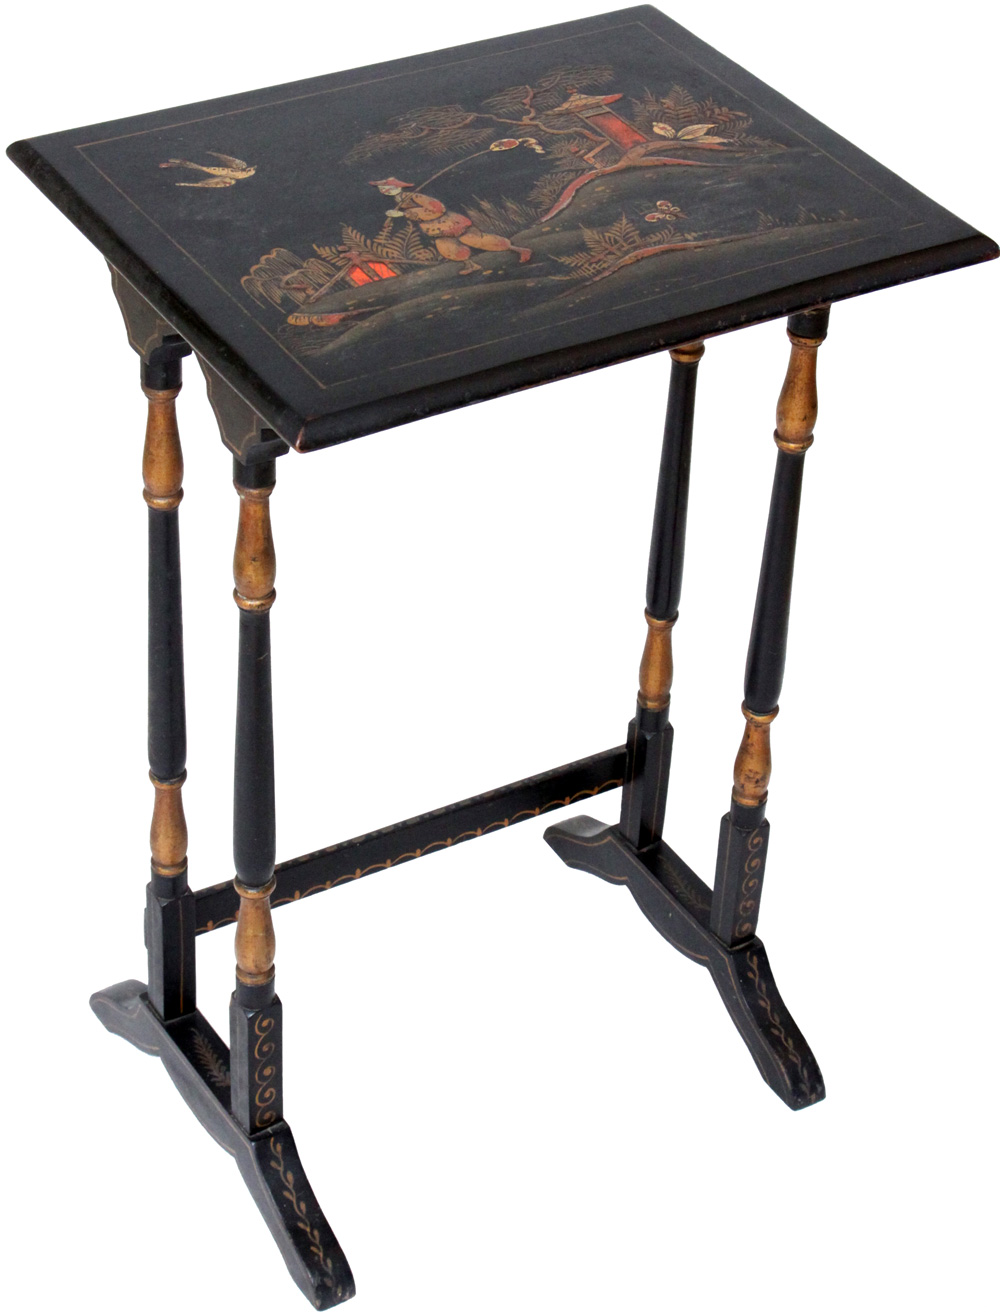 Antique English Nested Table - Medium size with Japanned Lacquer Painting - שולחן הגשה מקונן - אנגלי עתיק  - Back To List of Antique Furniture